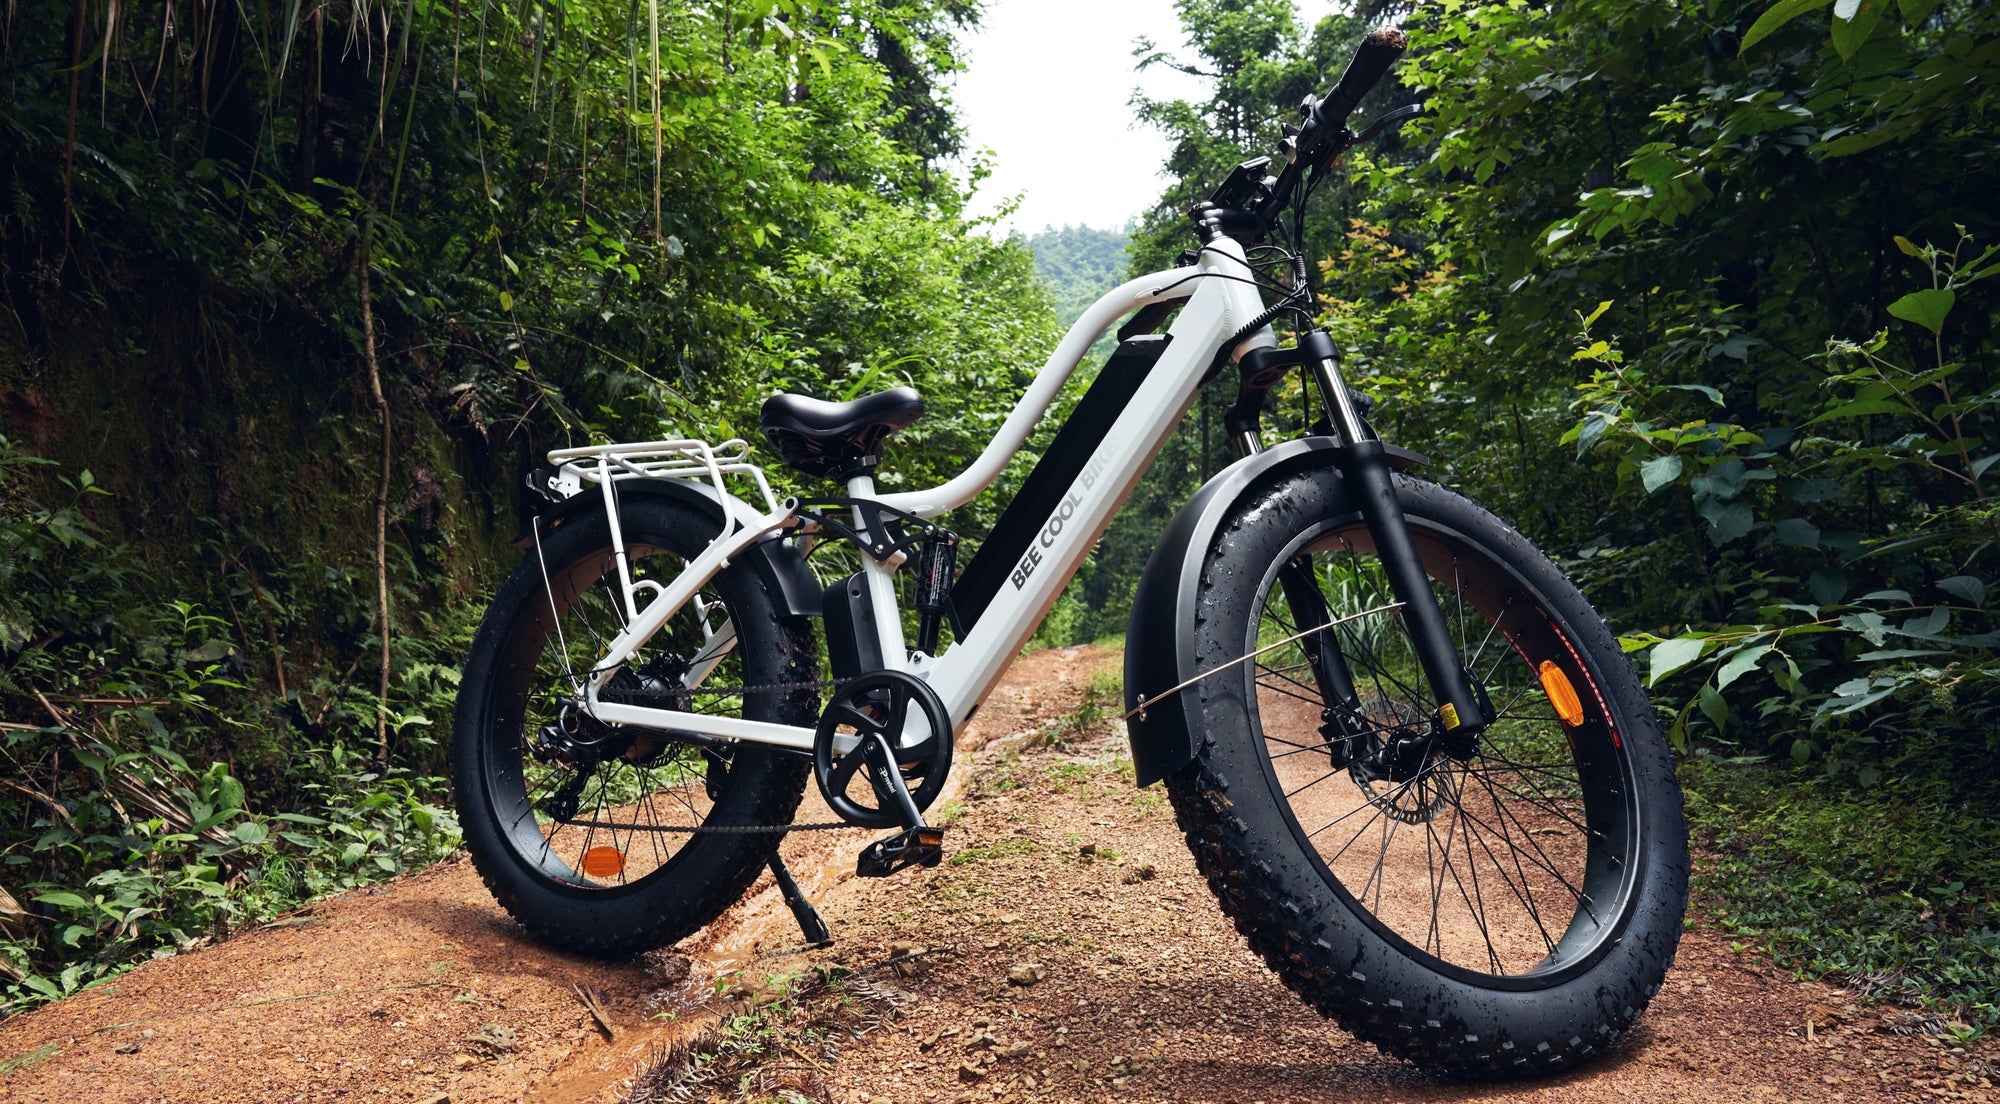 Considerations for Your First eBike: A Guide to Making the Right Choice